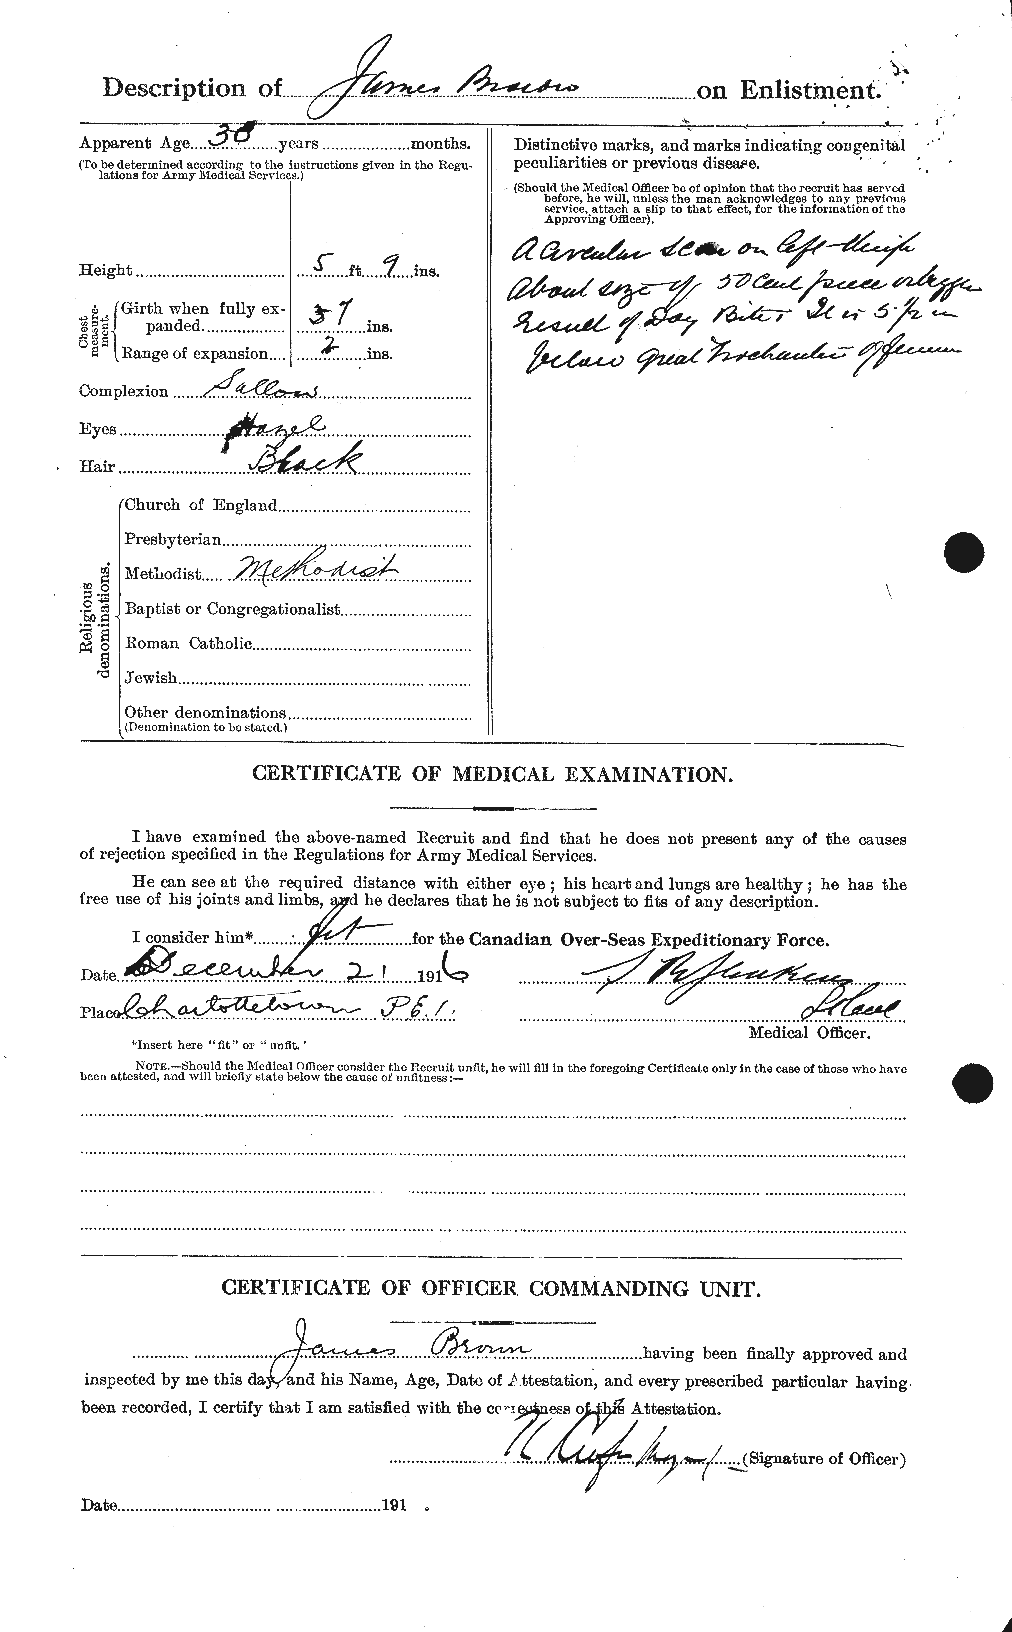 Personnel Records of the First World War - CEF 265736b